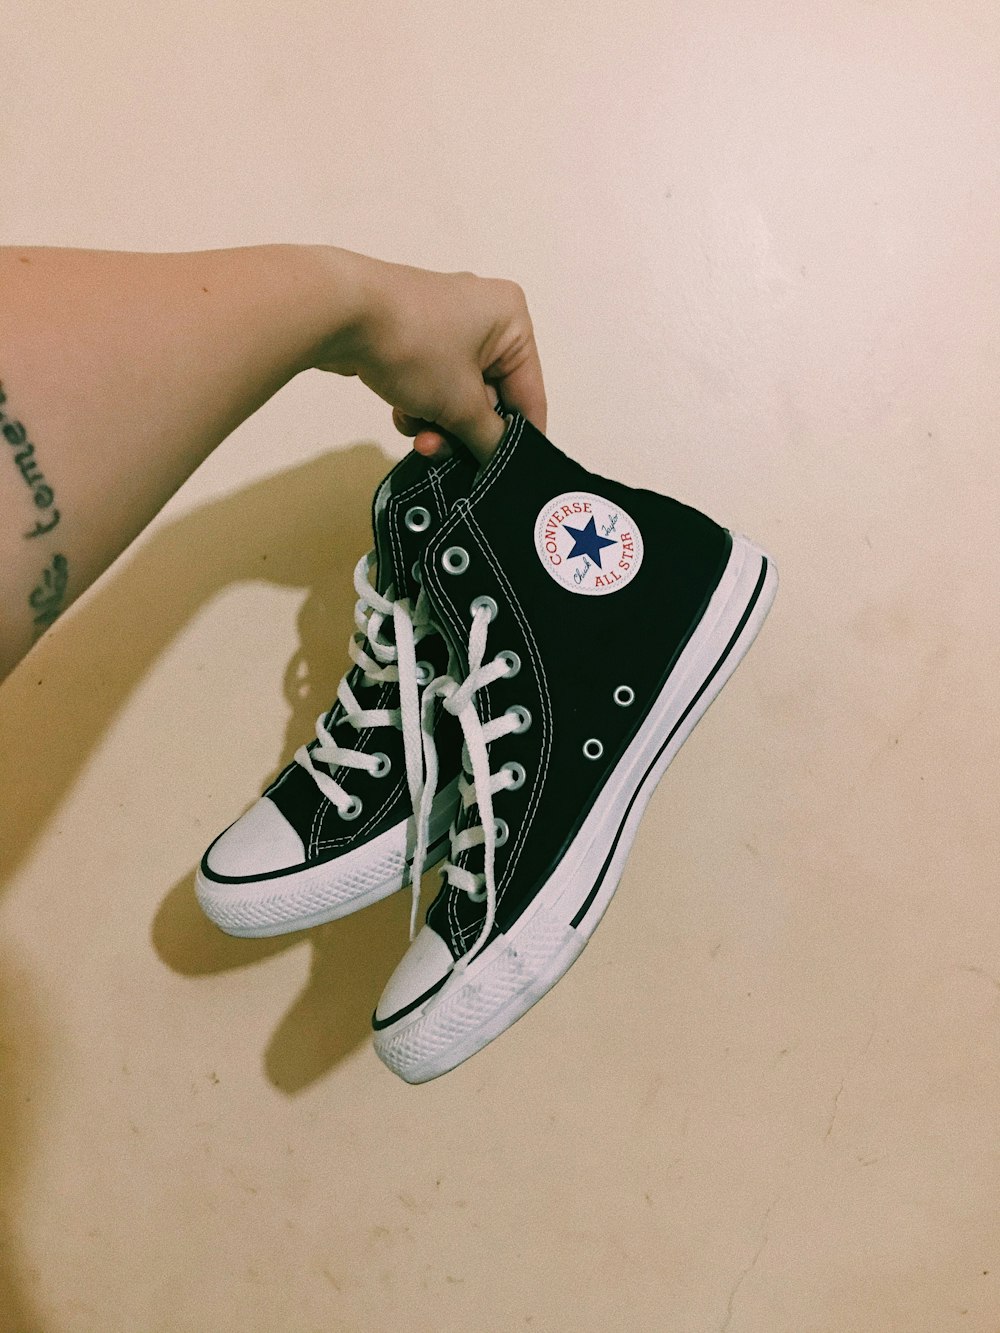 person wearing black converse all star high top sneakers photo – Free Image  on Unsplash